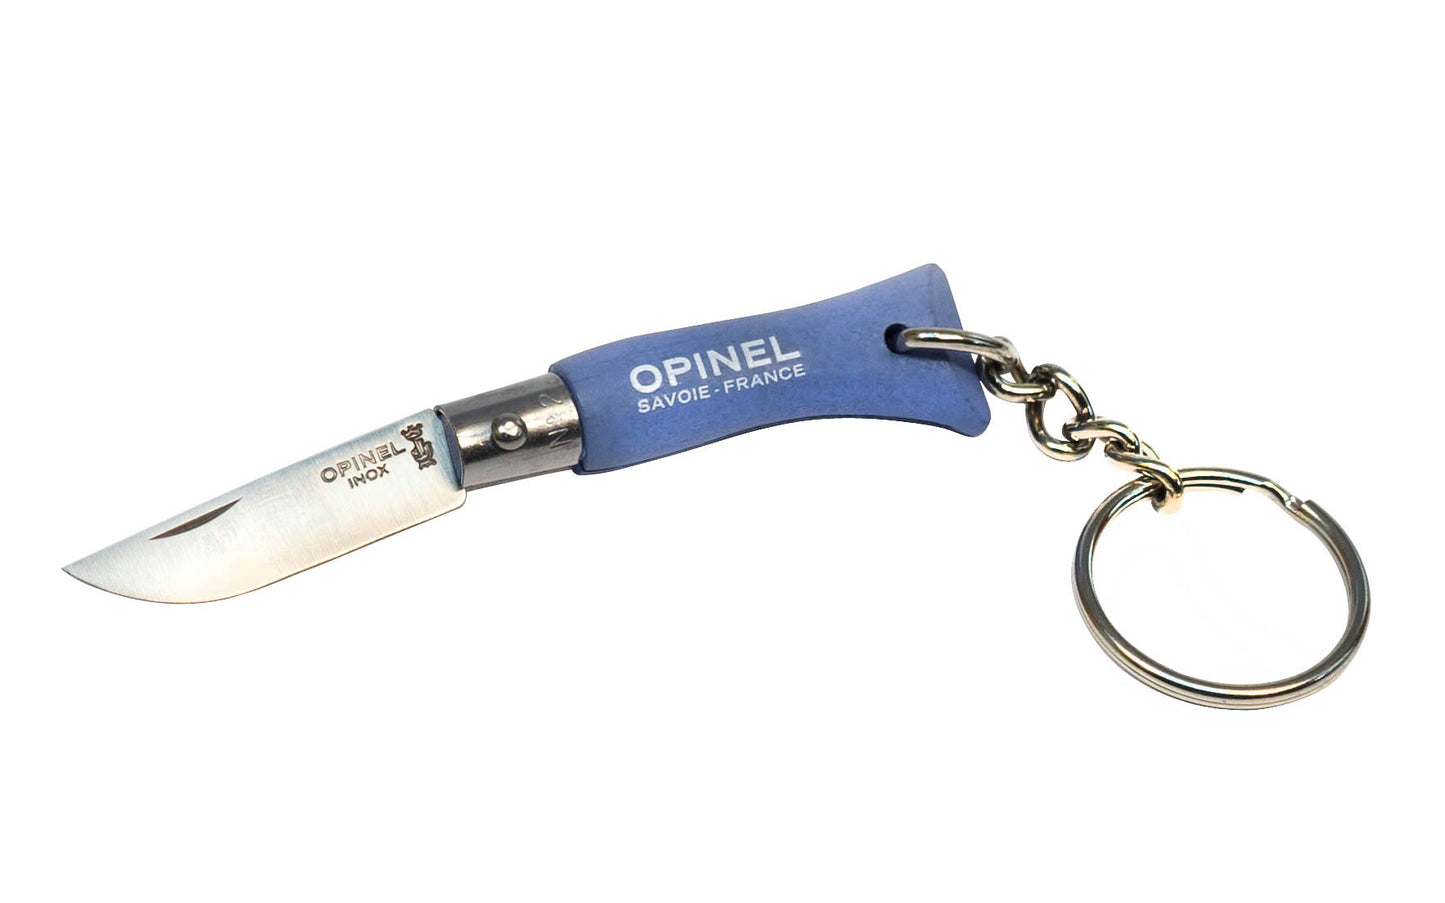 Opinel Mini Stainless Steel Knife with Keychain ~ "Sky Blue" Color